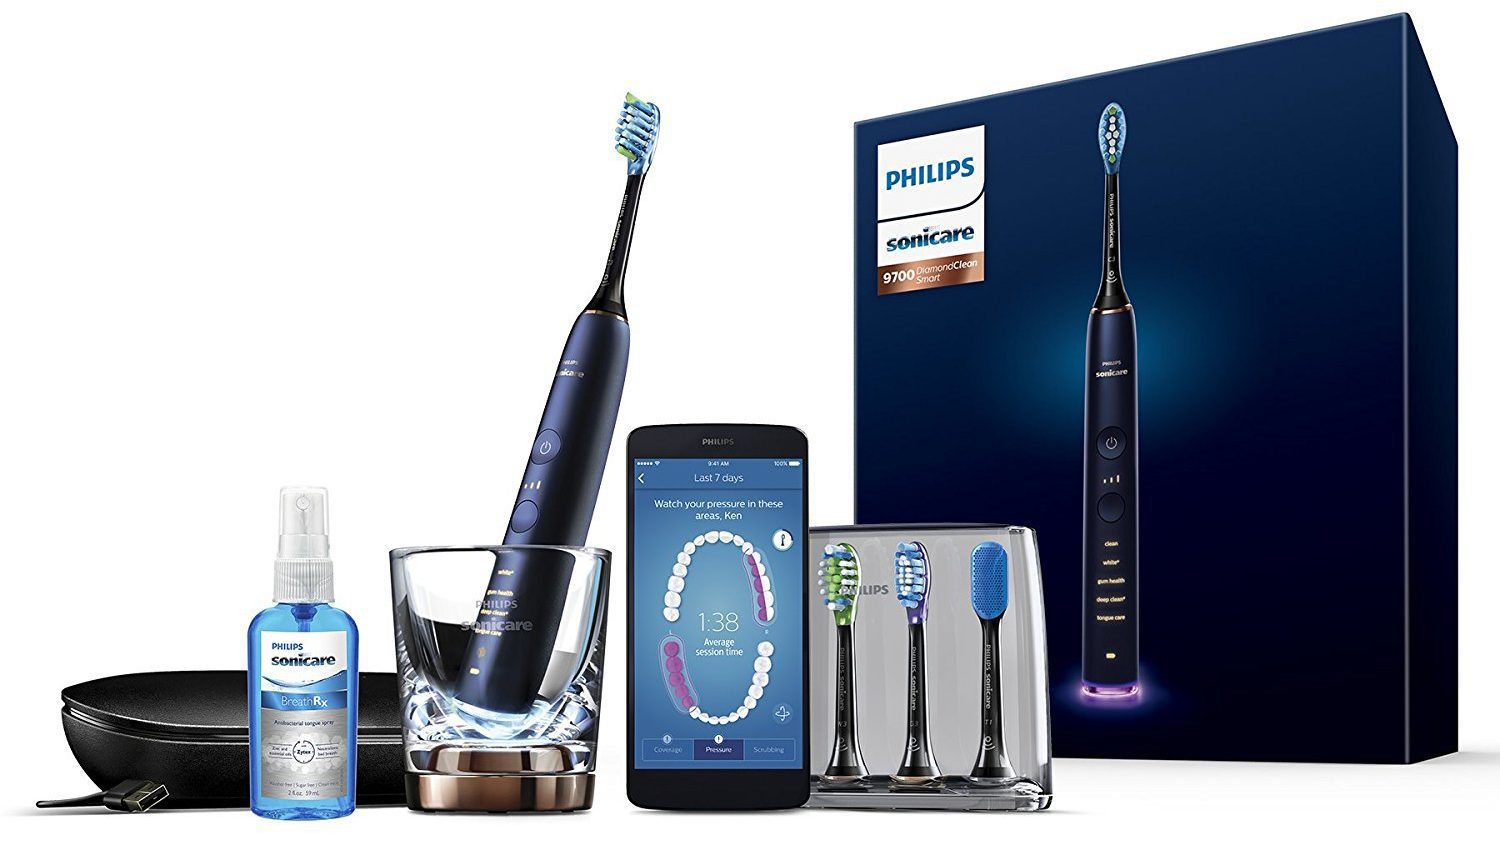 Philips IFA 2018: Philips Diamond CleanSmart is the most advanced toothbrush on the market